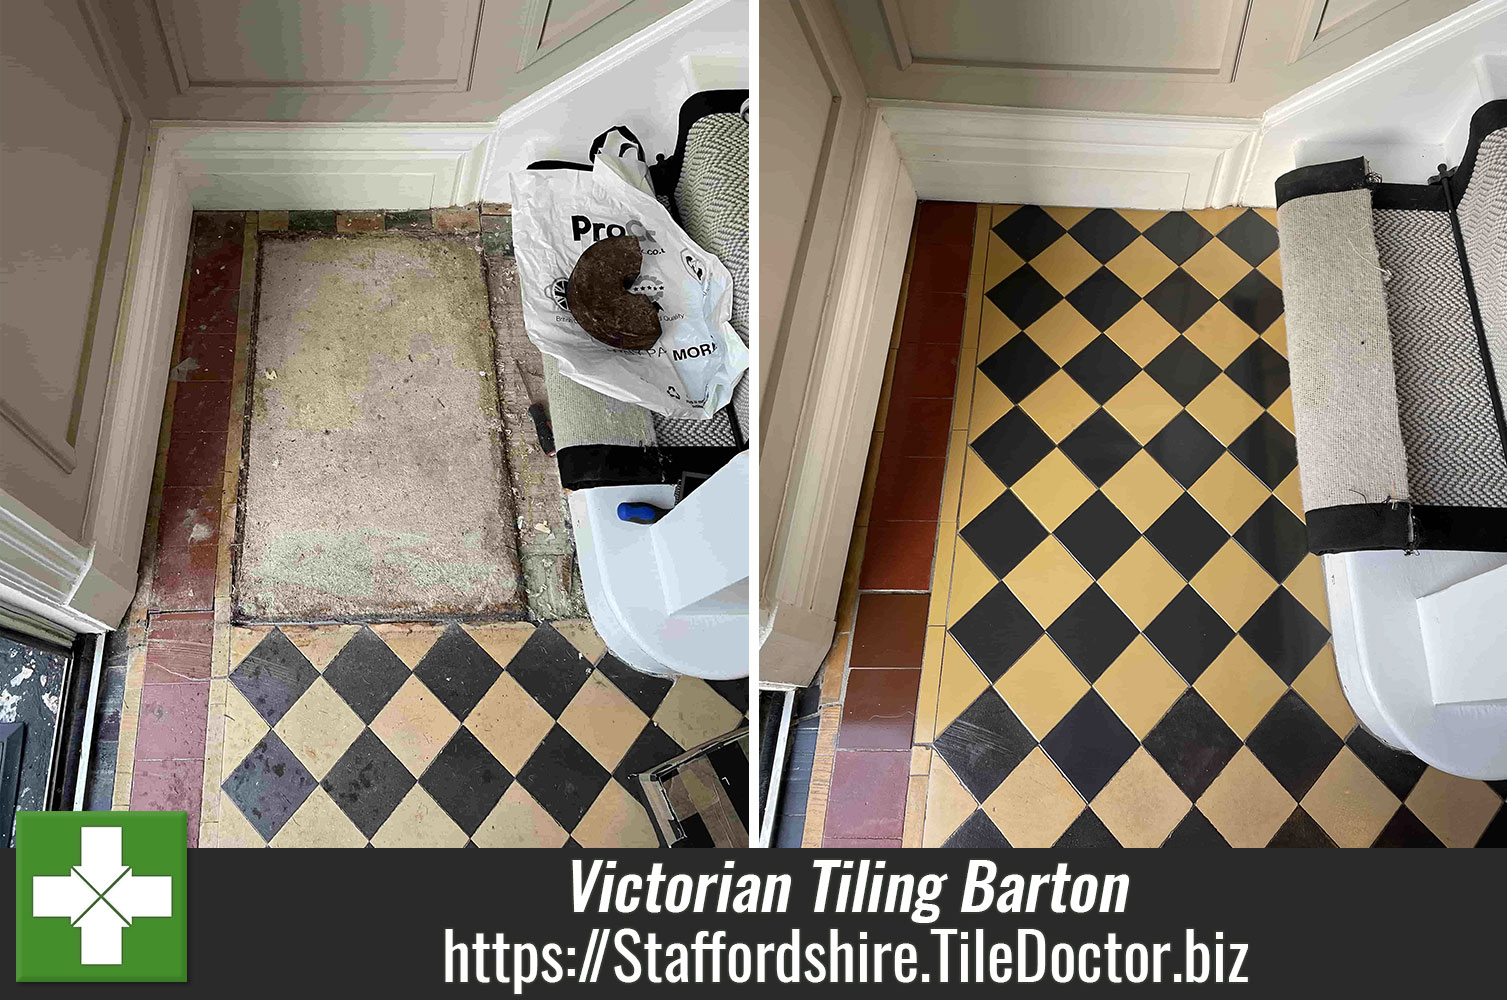 Using a 100-Grit Diamond Pad to Deep Clean and Restore Victorian Tiling in Barton Staffordshire